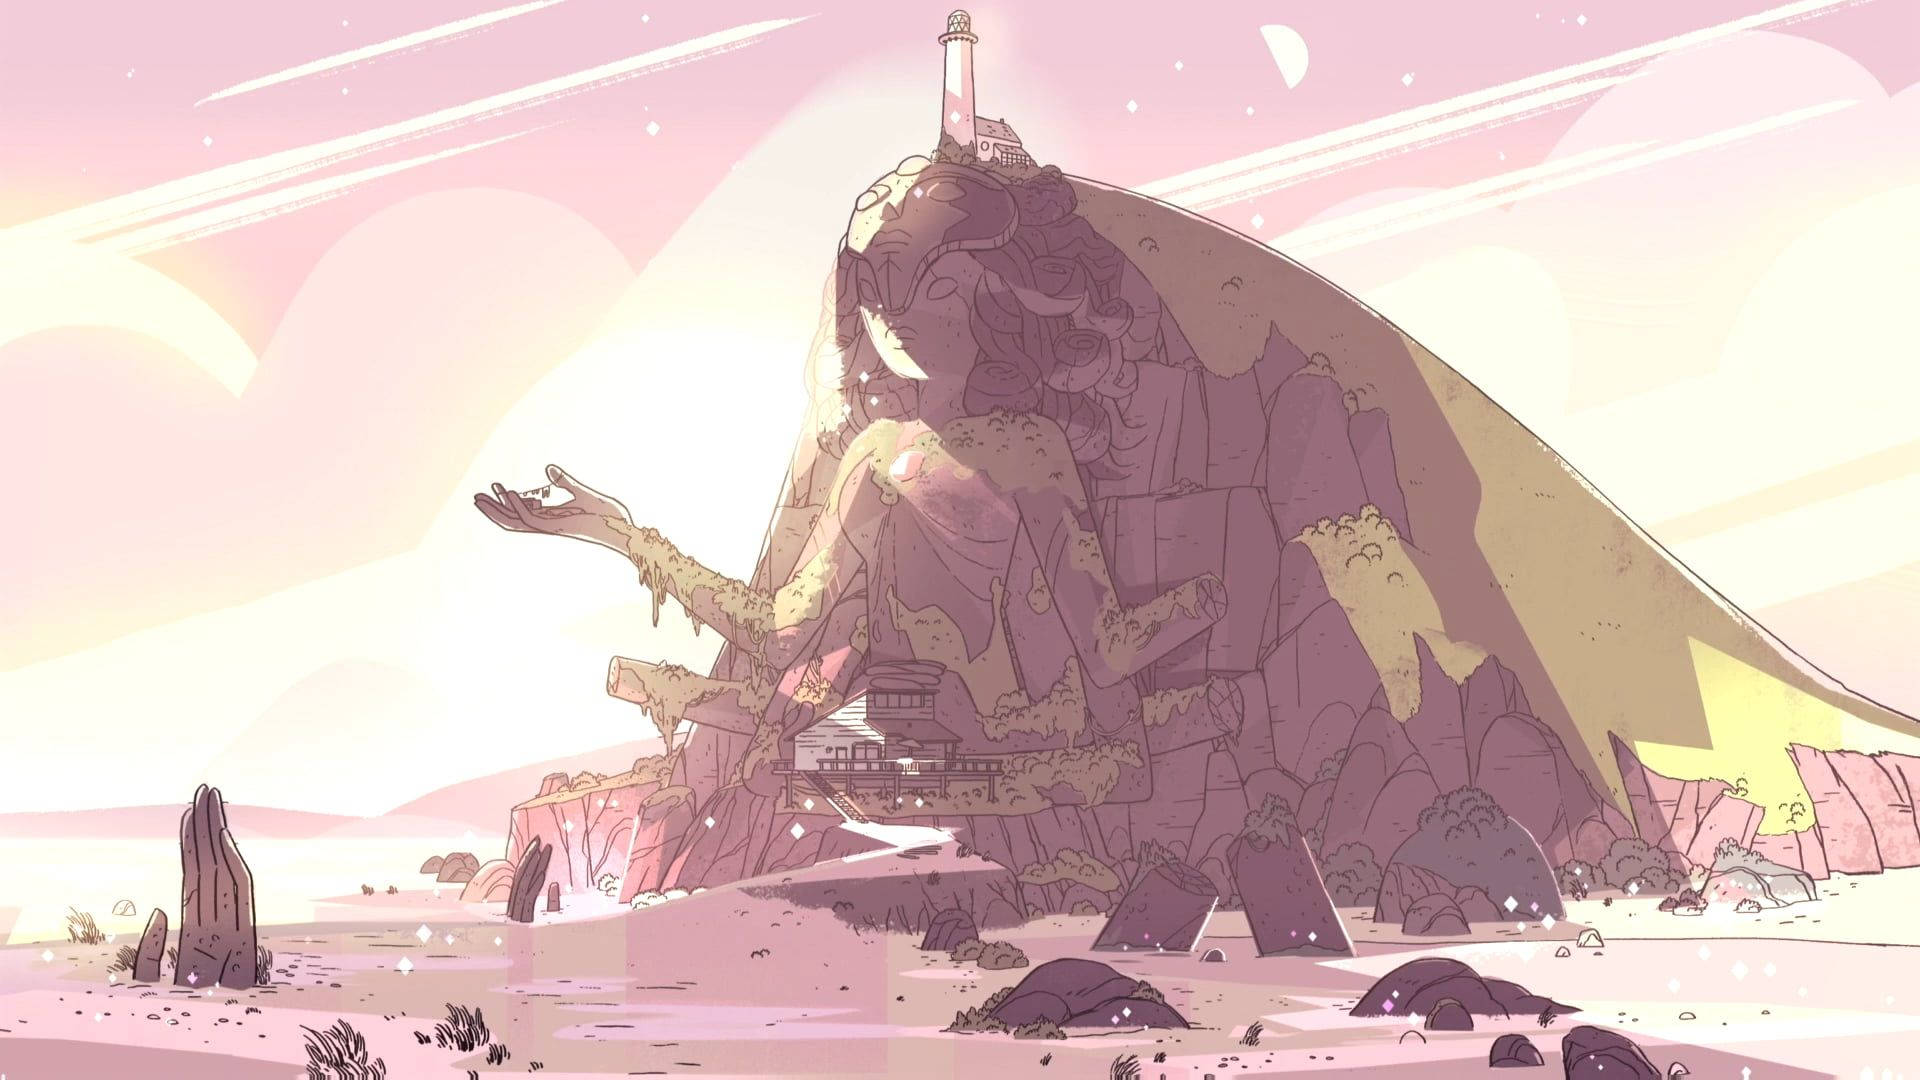 Steven Universe 1920X1080 Wallpaper and Background Image